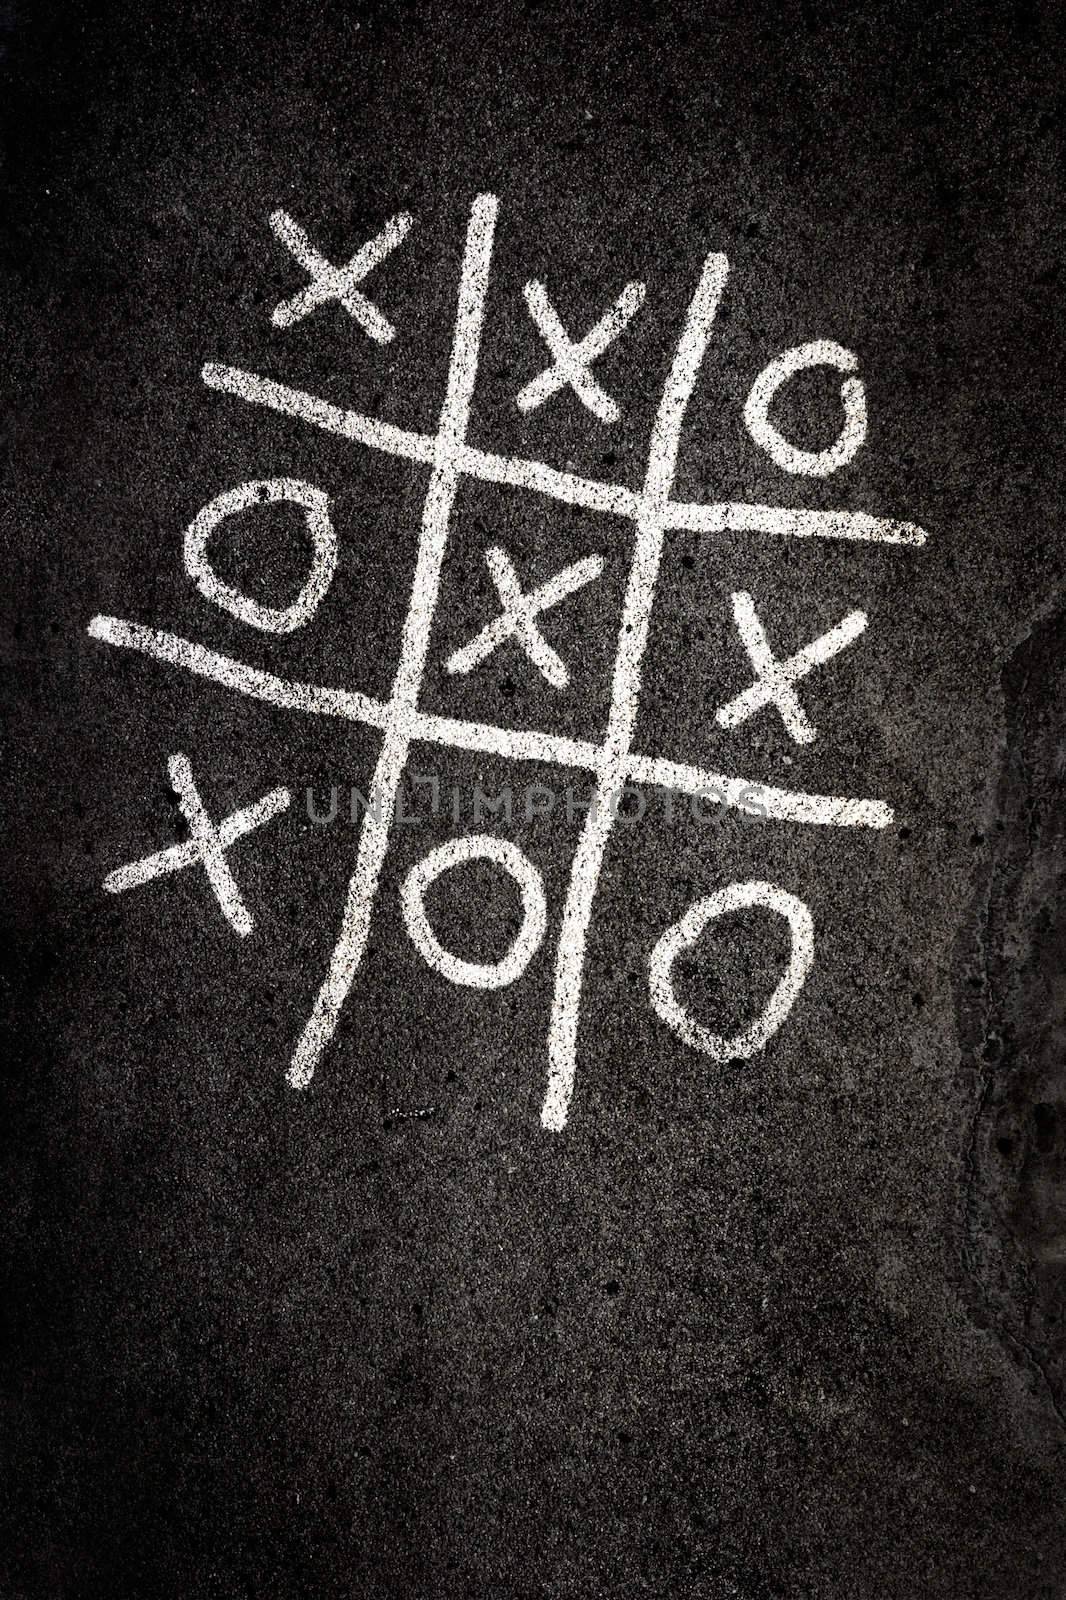 Noughts and Crosses game by Iko